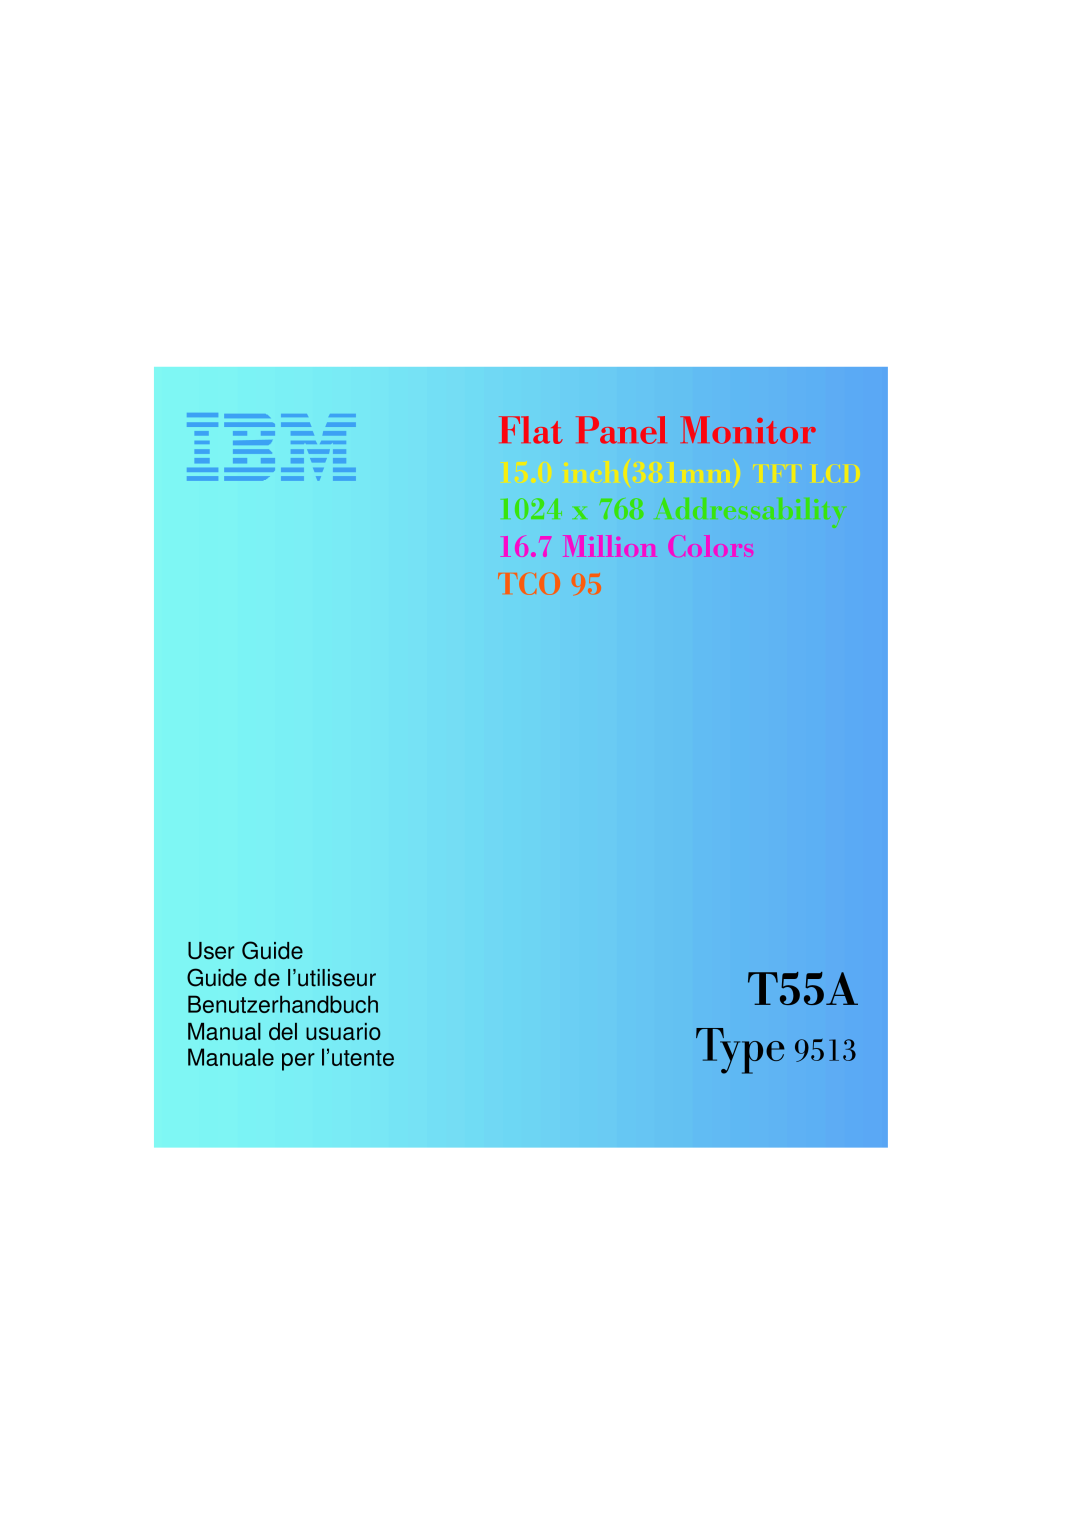 IBM T 55A manual T55A, Type, Flat Panel Monitor, inch381mm TFT LCD 1024 x 768 Addressability, Million Colors TCO 